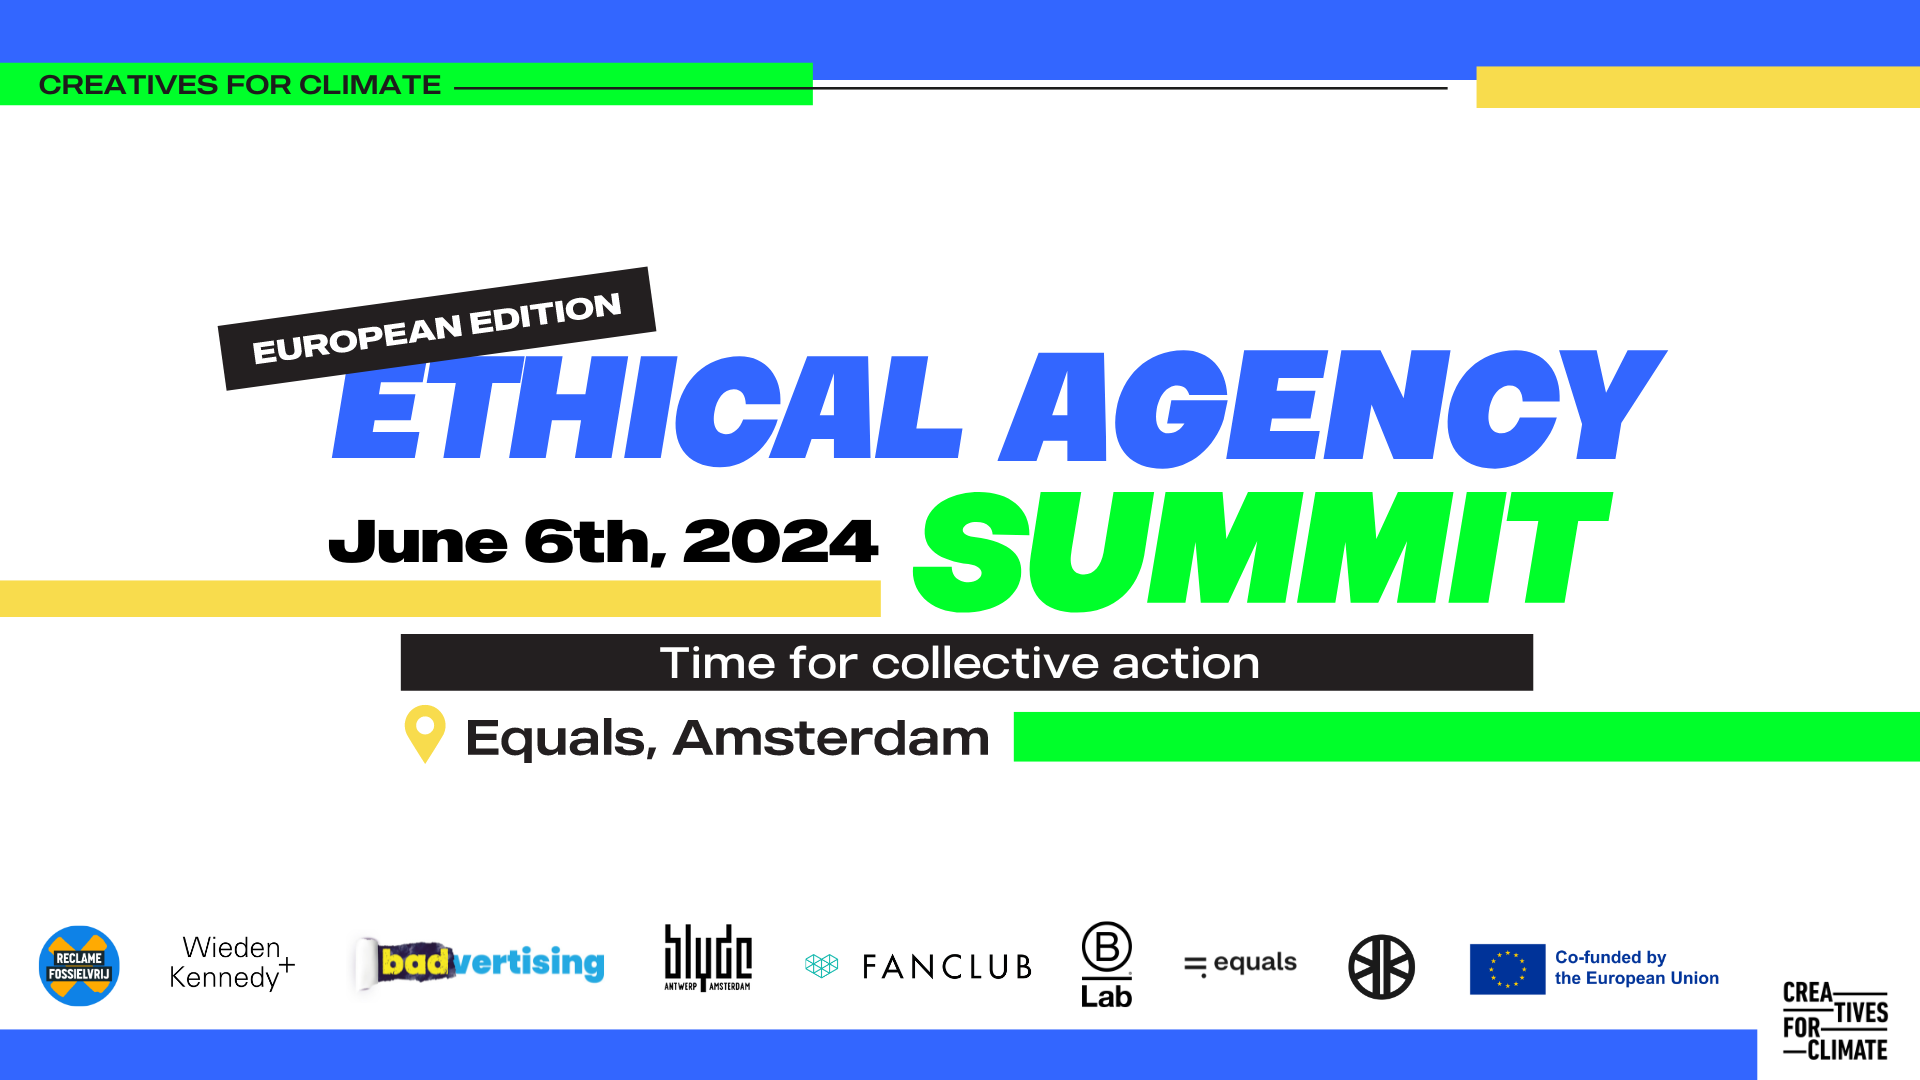 Creatives for Climate Ethical Agency Summit Targets Advertising and PR Industry to Accelerate Climate Action